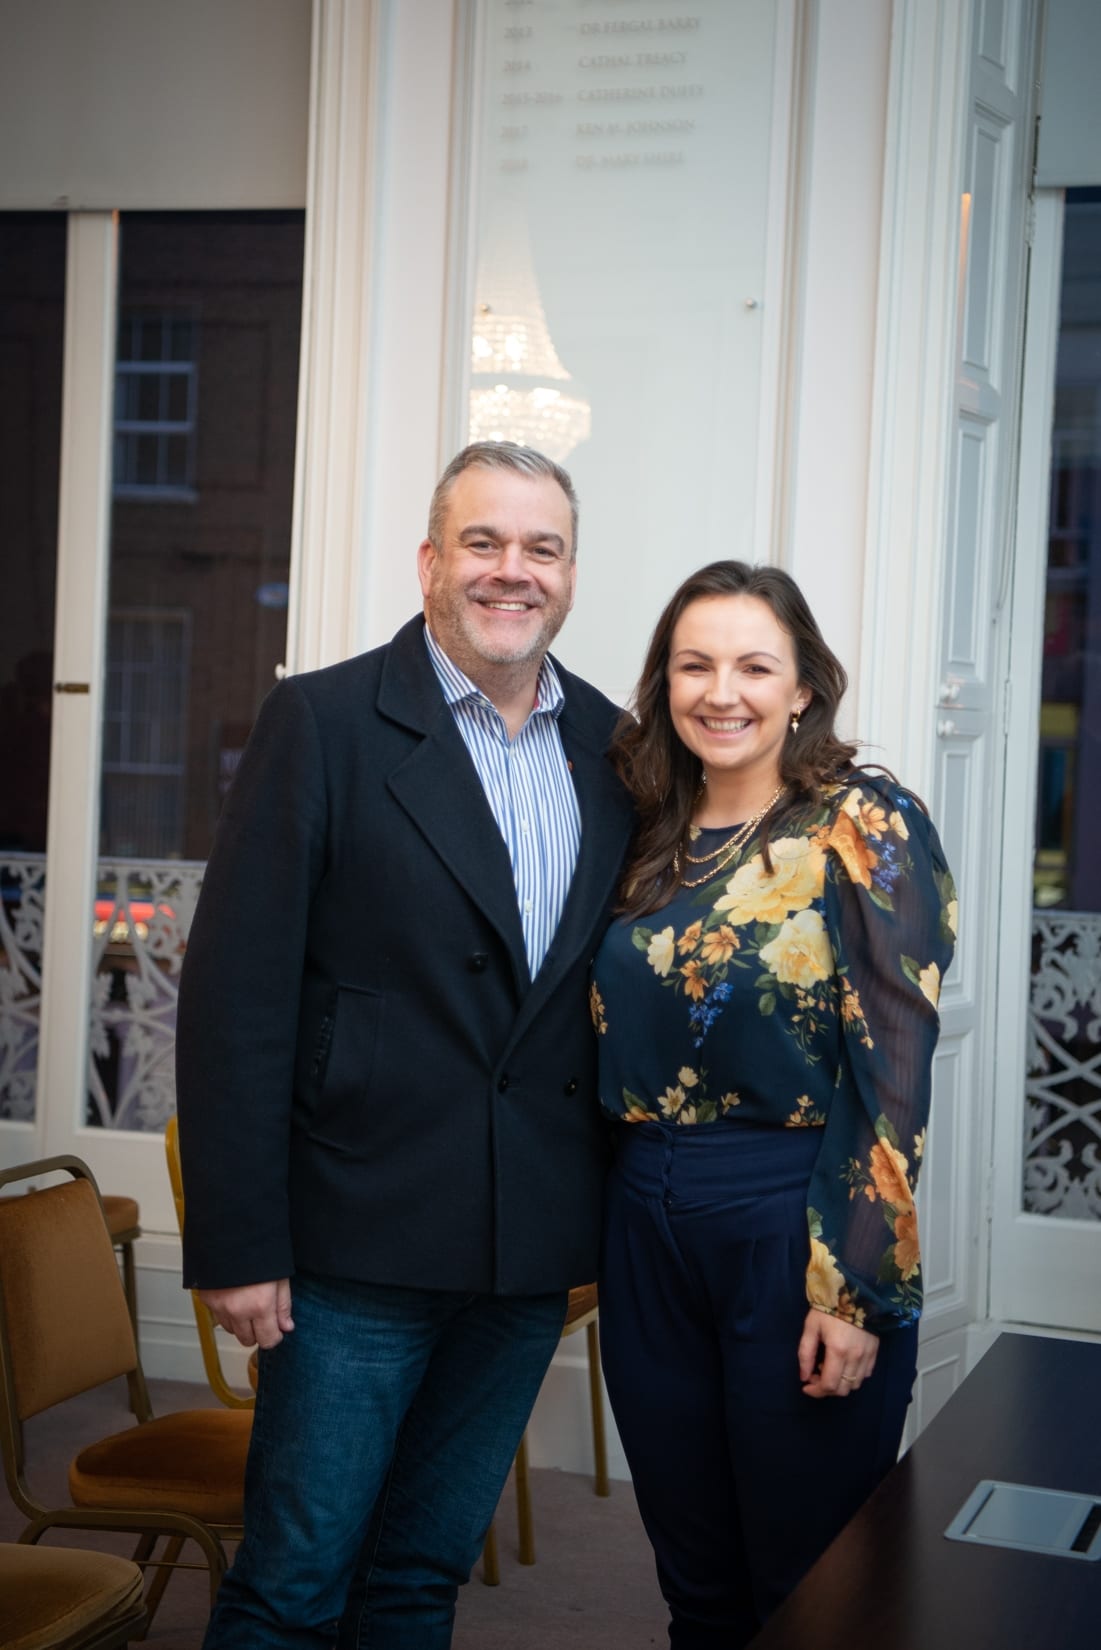 No repro fee-Limerick Chamber AGM 2020 which was held in Limerick Chamber Boardroom on Thursday 27th February - From Left to Right: Noel Gavin - Northern Trust, Dr Caitriona Cahill - Limerick Chamber 
Photo credit Shauna Kennedy